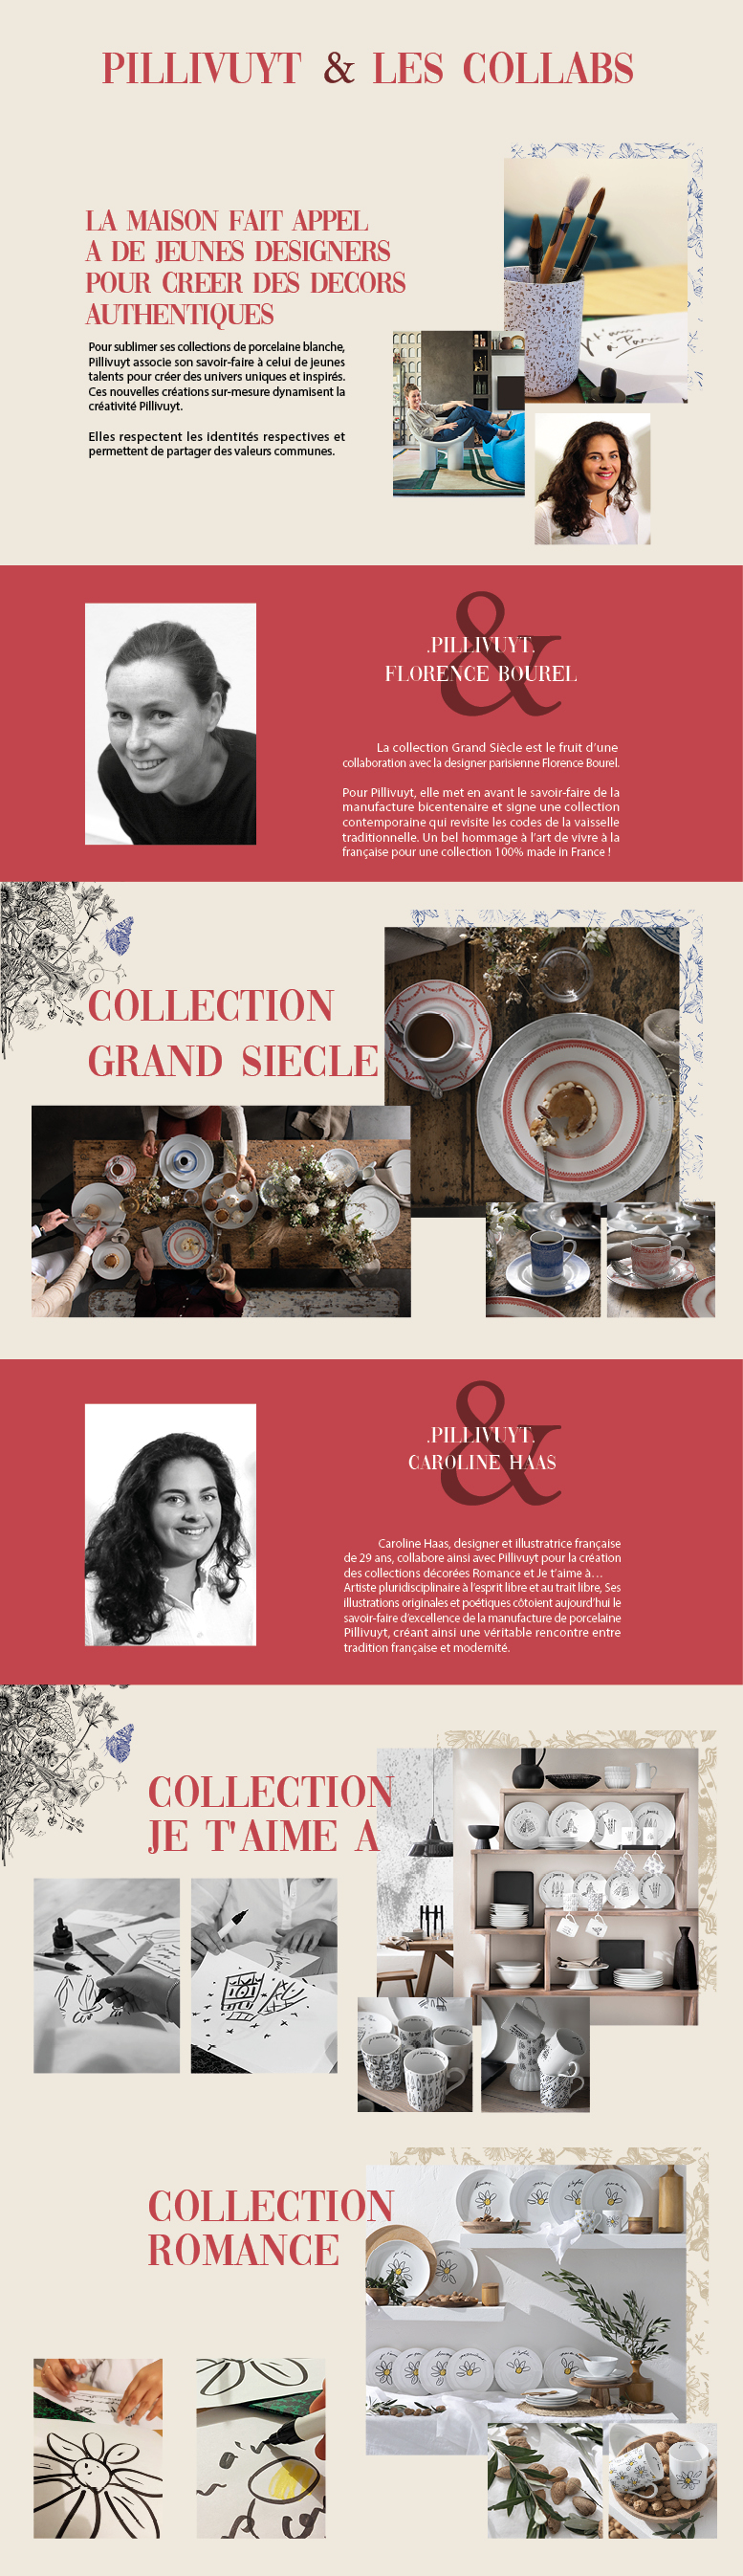 Collection Grand Siécle